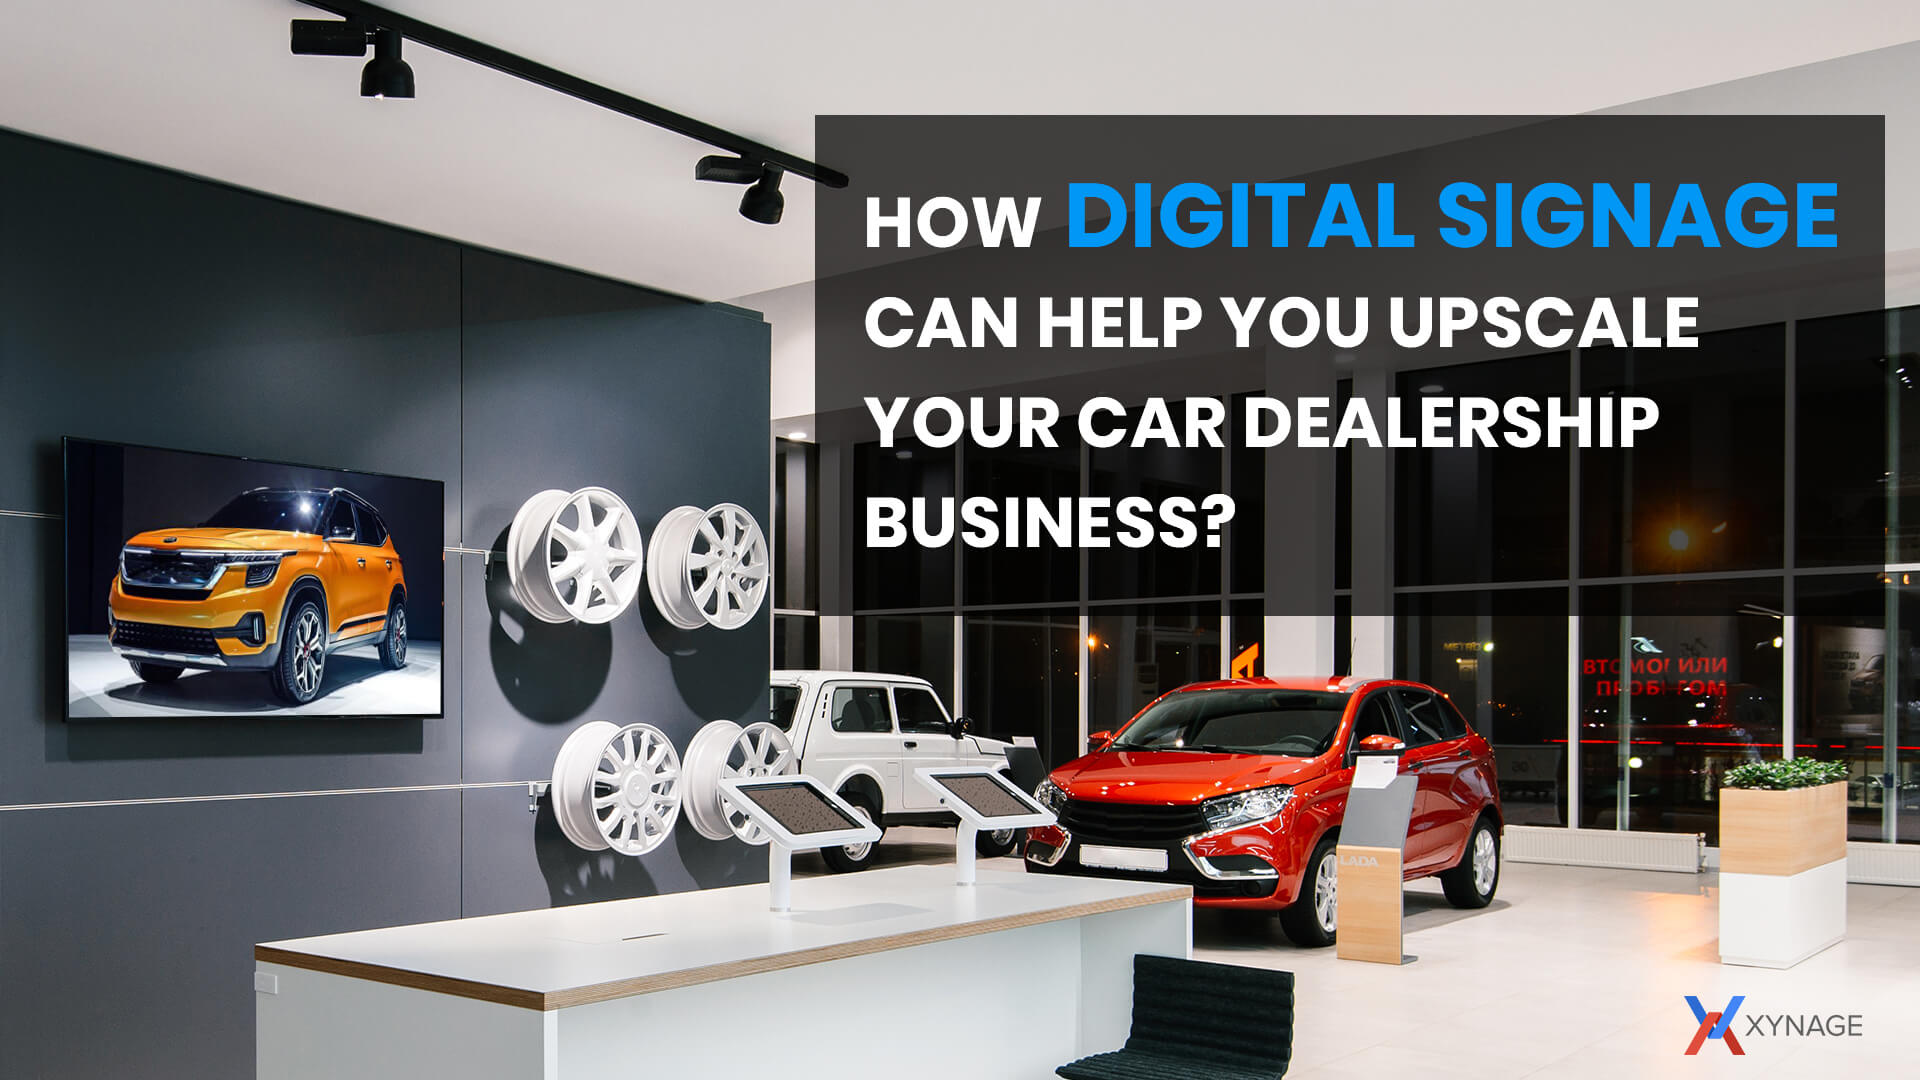 How Digital Signage can help you Upscale your Car Dealership Business?